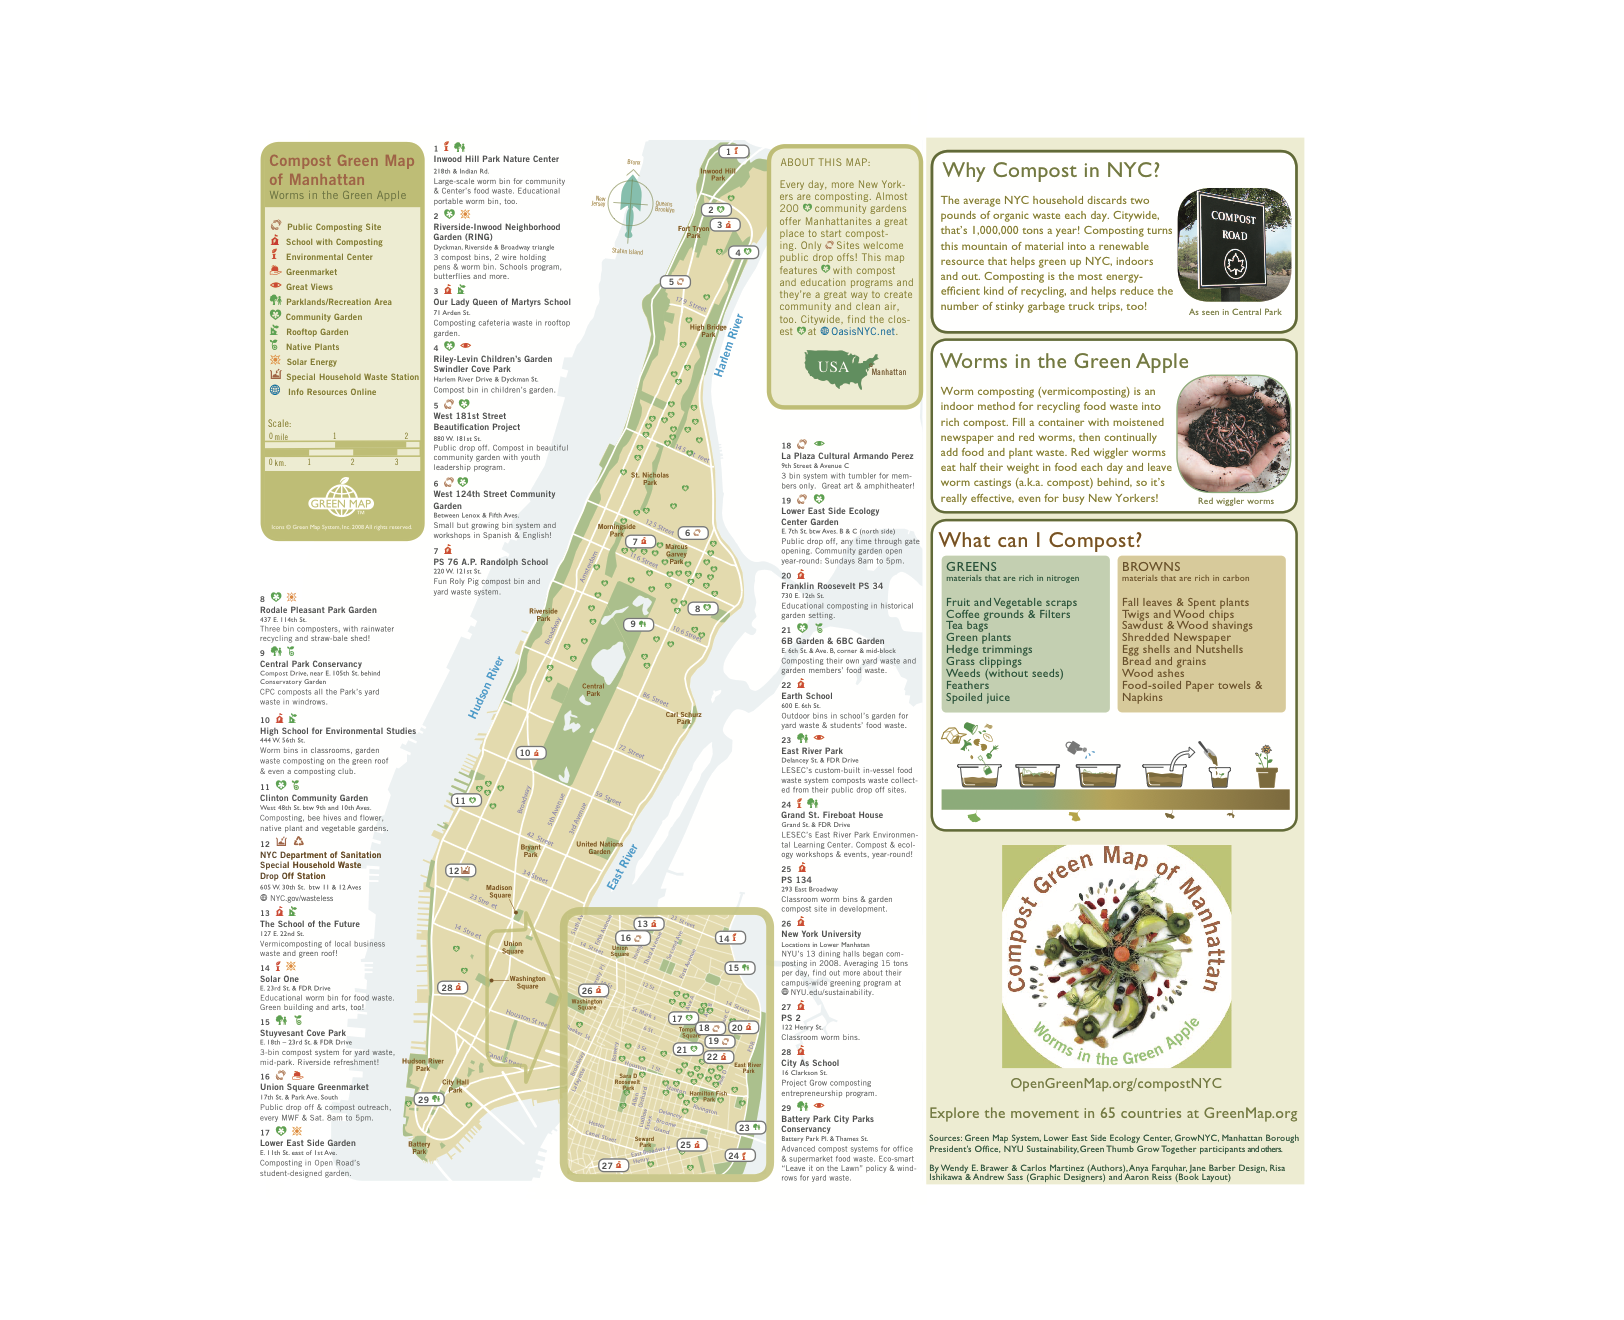 The Composting Green Map helped triple Manhattan's composting rate and raise the status of this climate-savvy practice